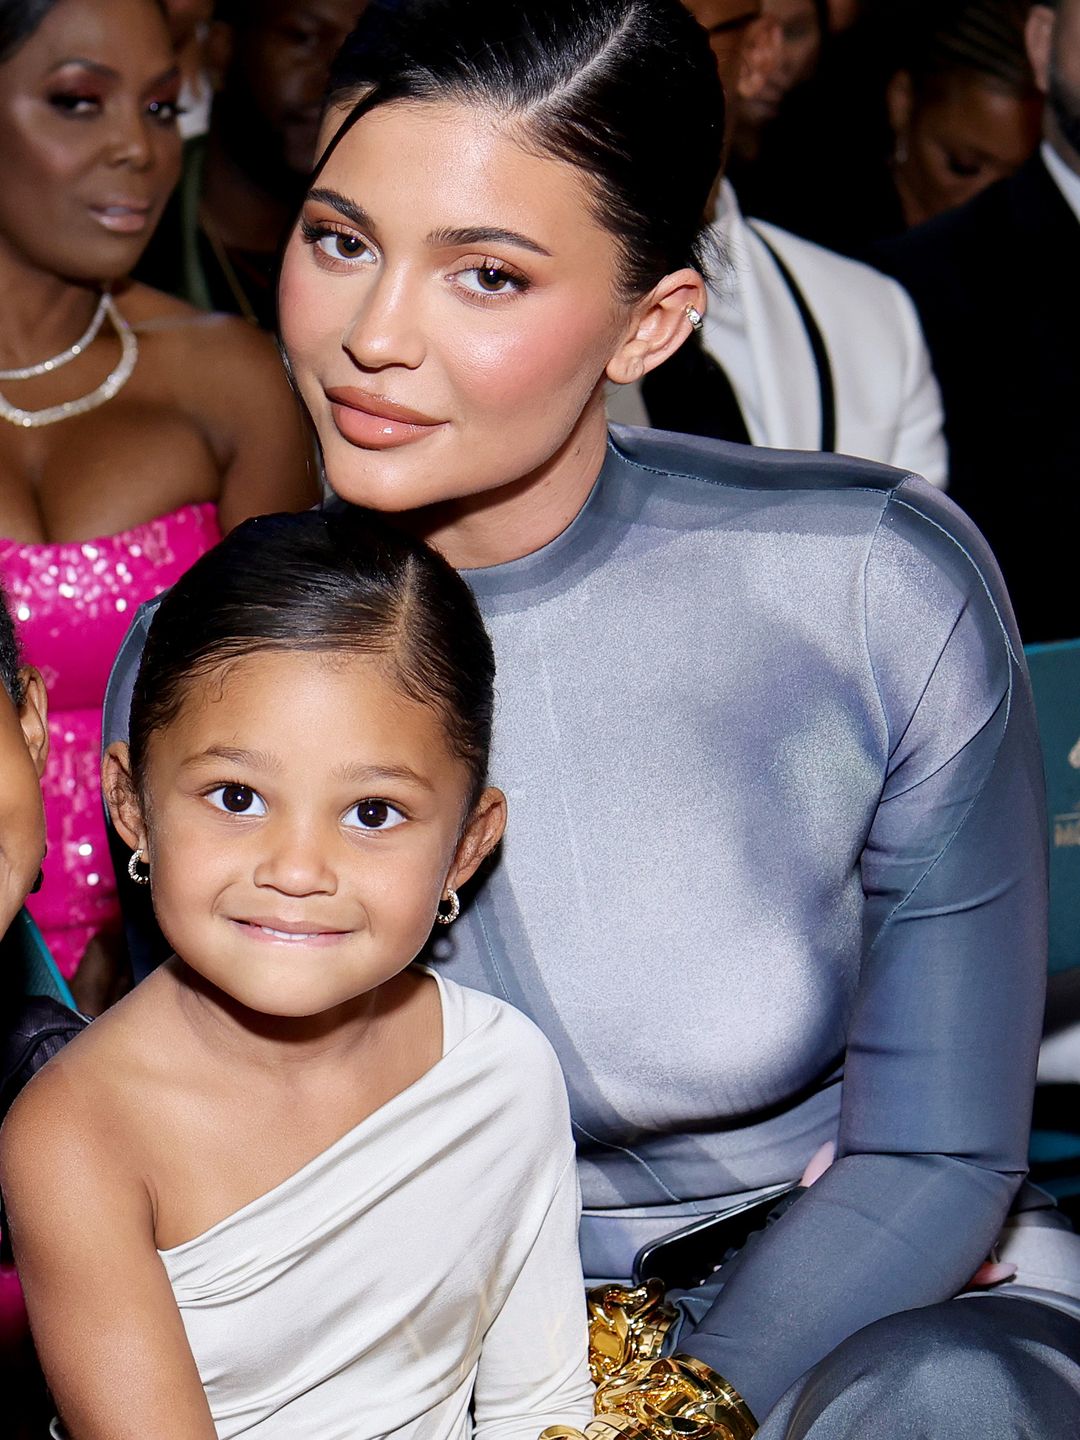 The socialite smiling with her daughter Stormi on her lap at an awards show